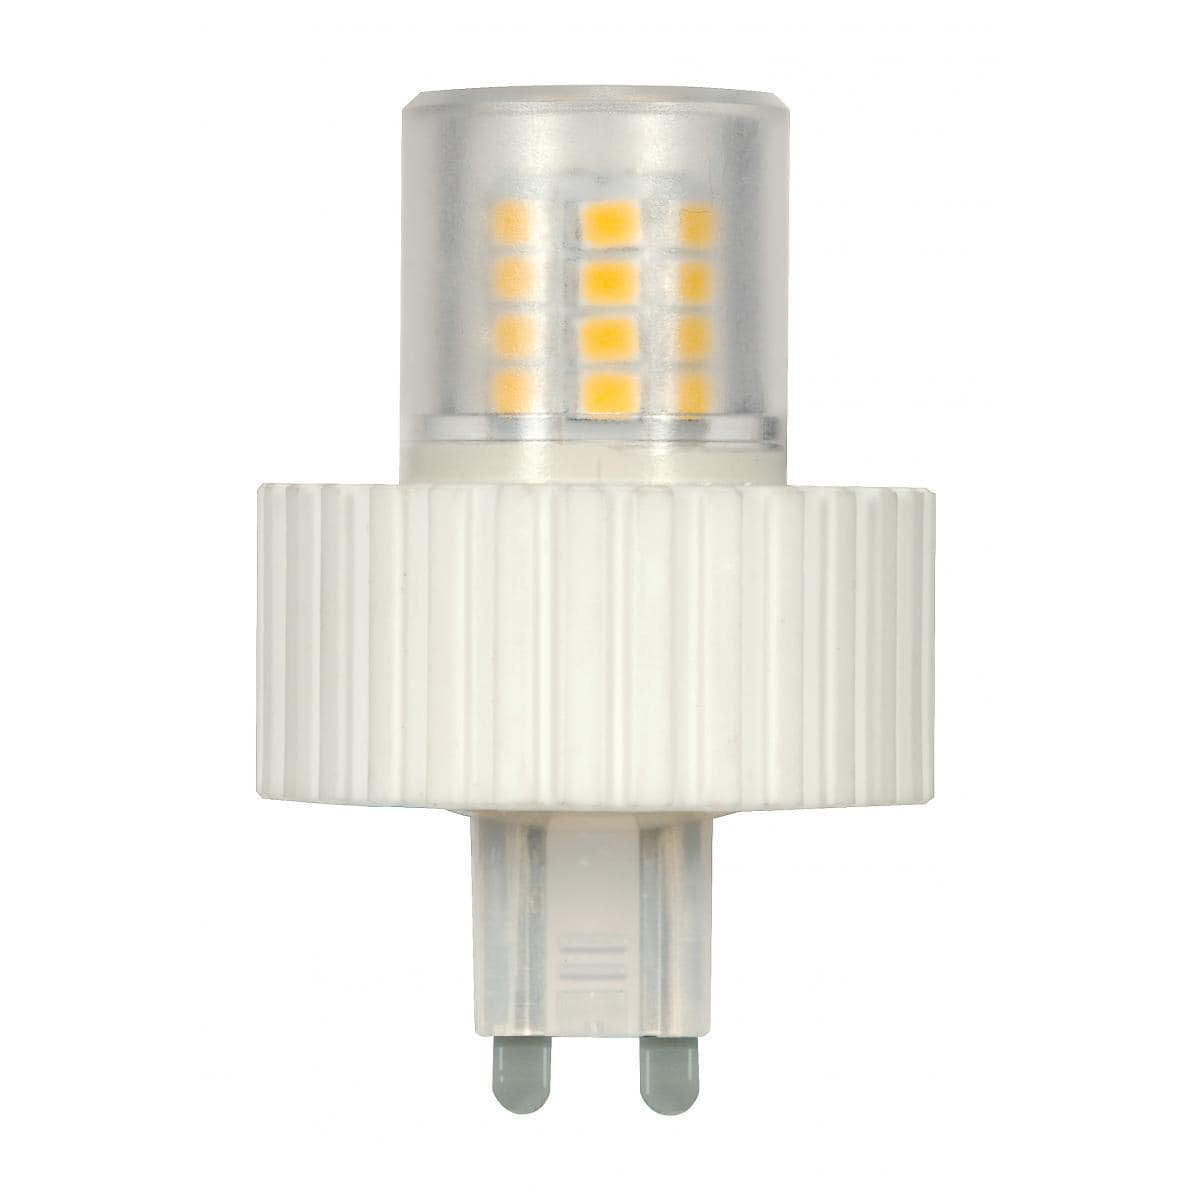 Antipoison wijs Supermarkt Satco S9228 5W 120V T4 Replacement LED Lamp with 3000K G9 Base 360 deg Beam  Angle - Walmart.com